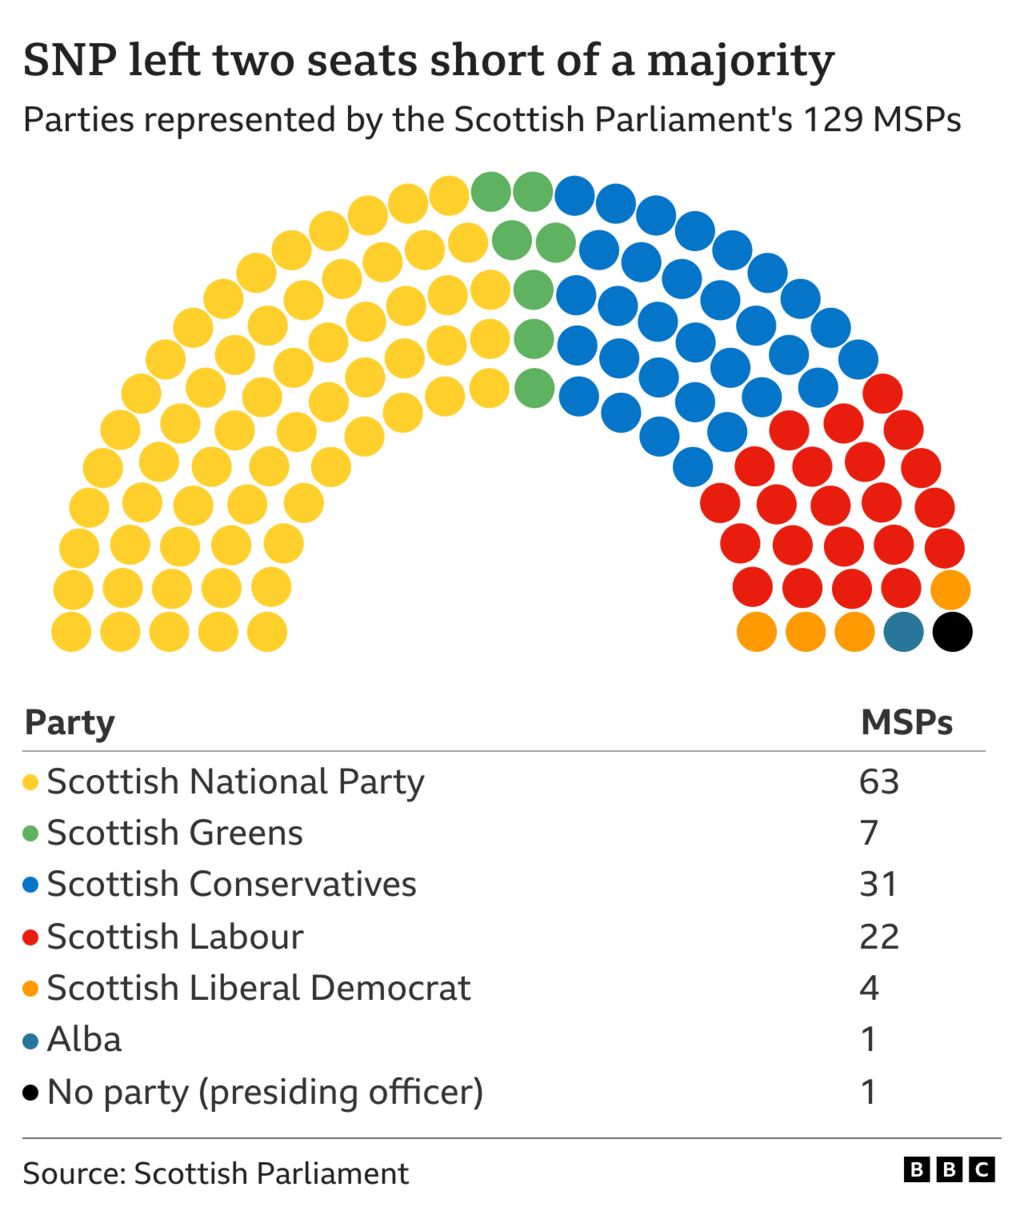 Graphic showing the make up of the Scottish Parliament with the SNP two seats short of a majority